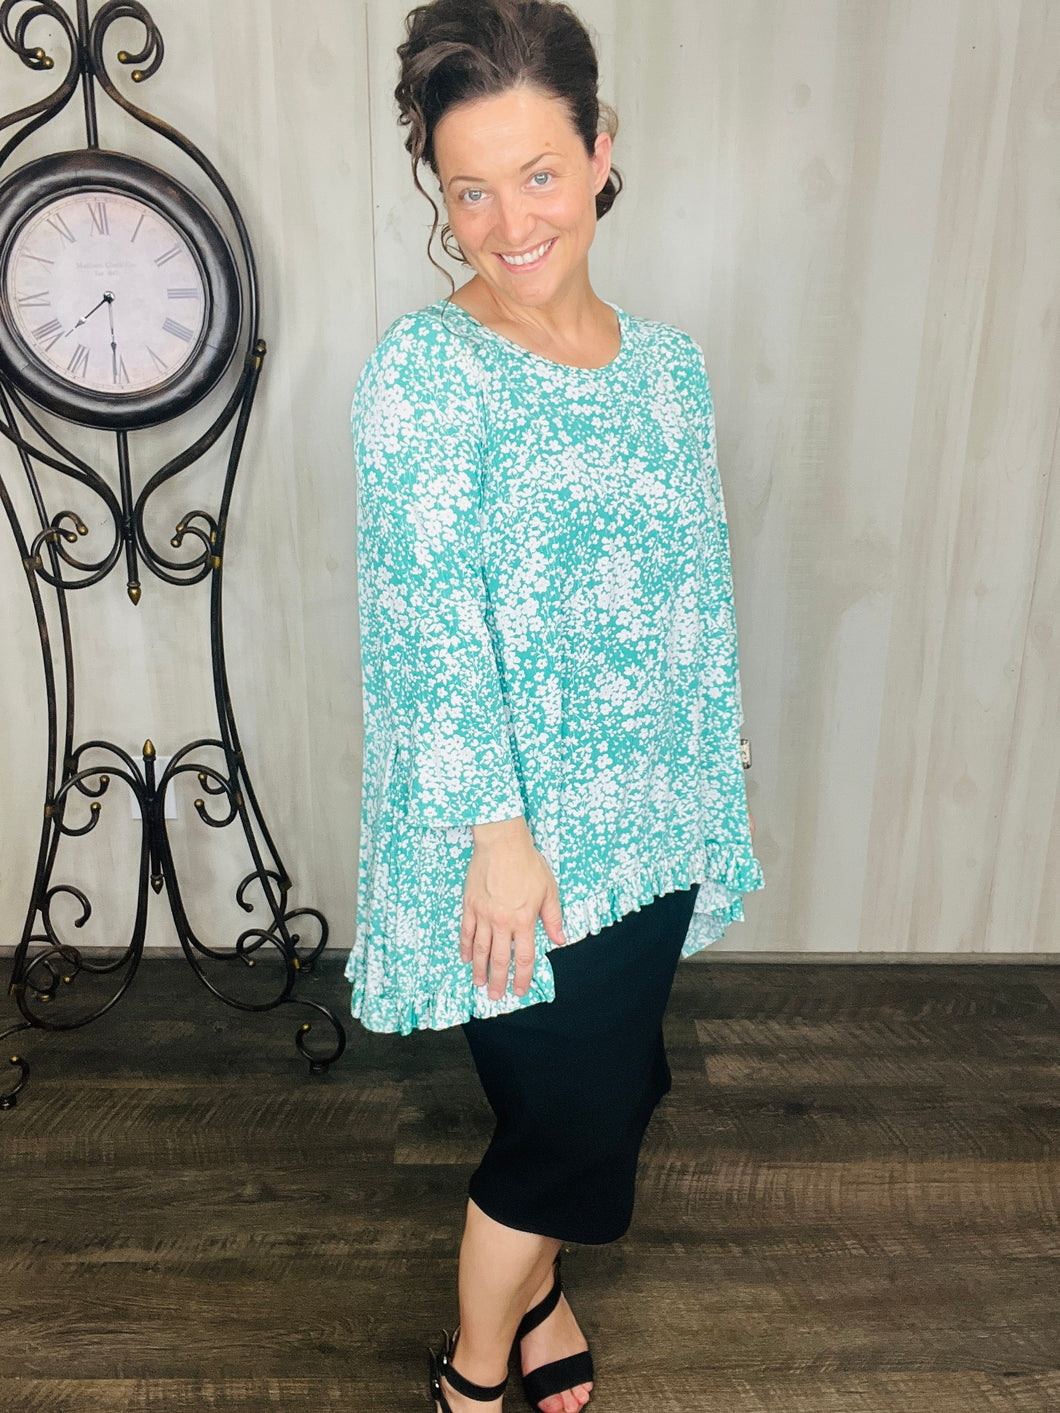 Samantha Teal & Floral High-Low Tunic